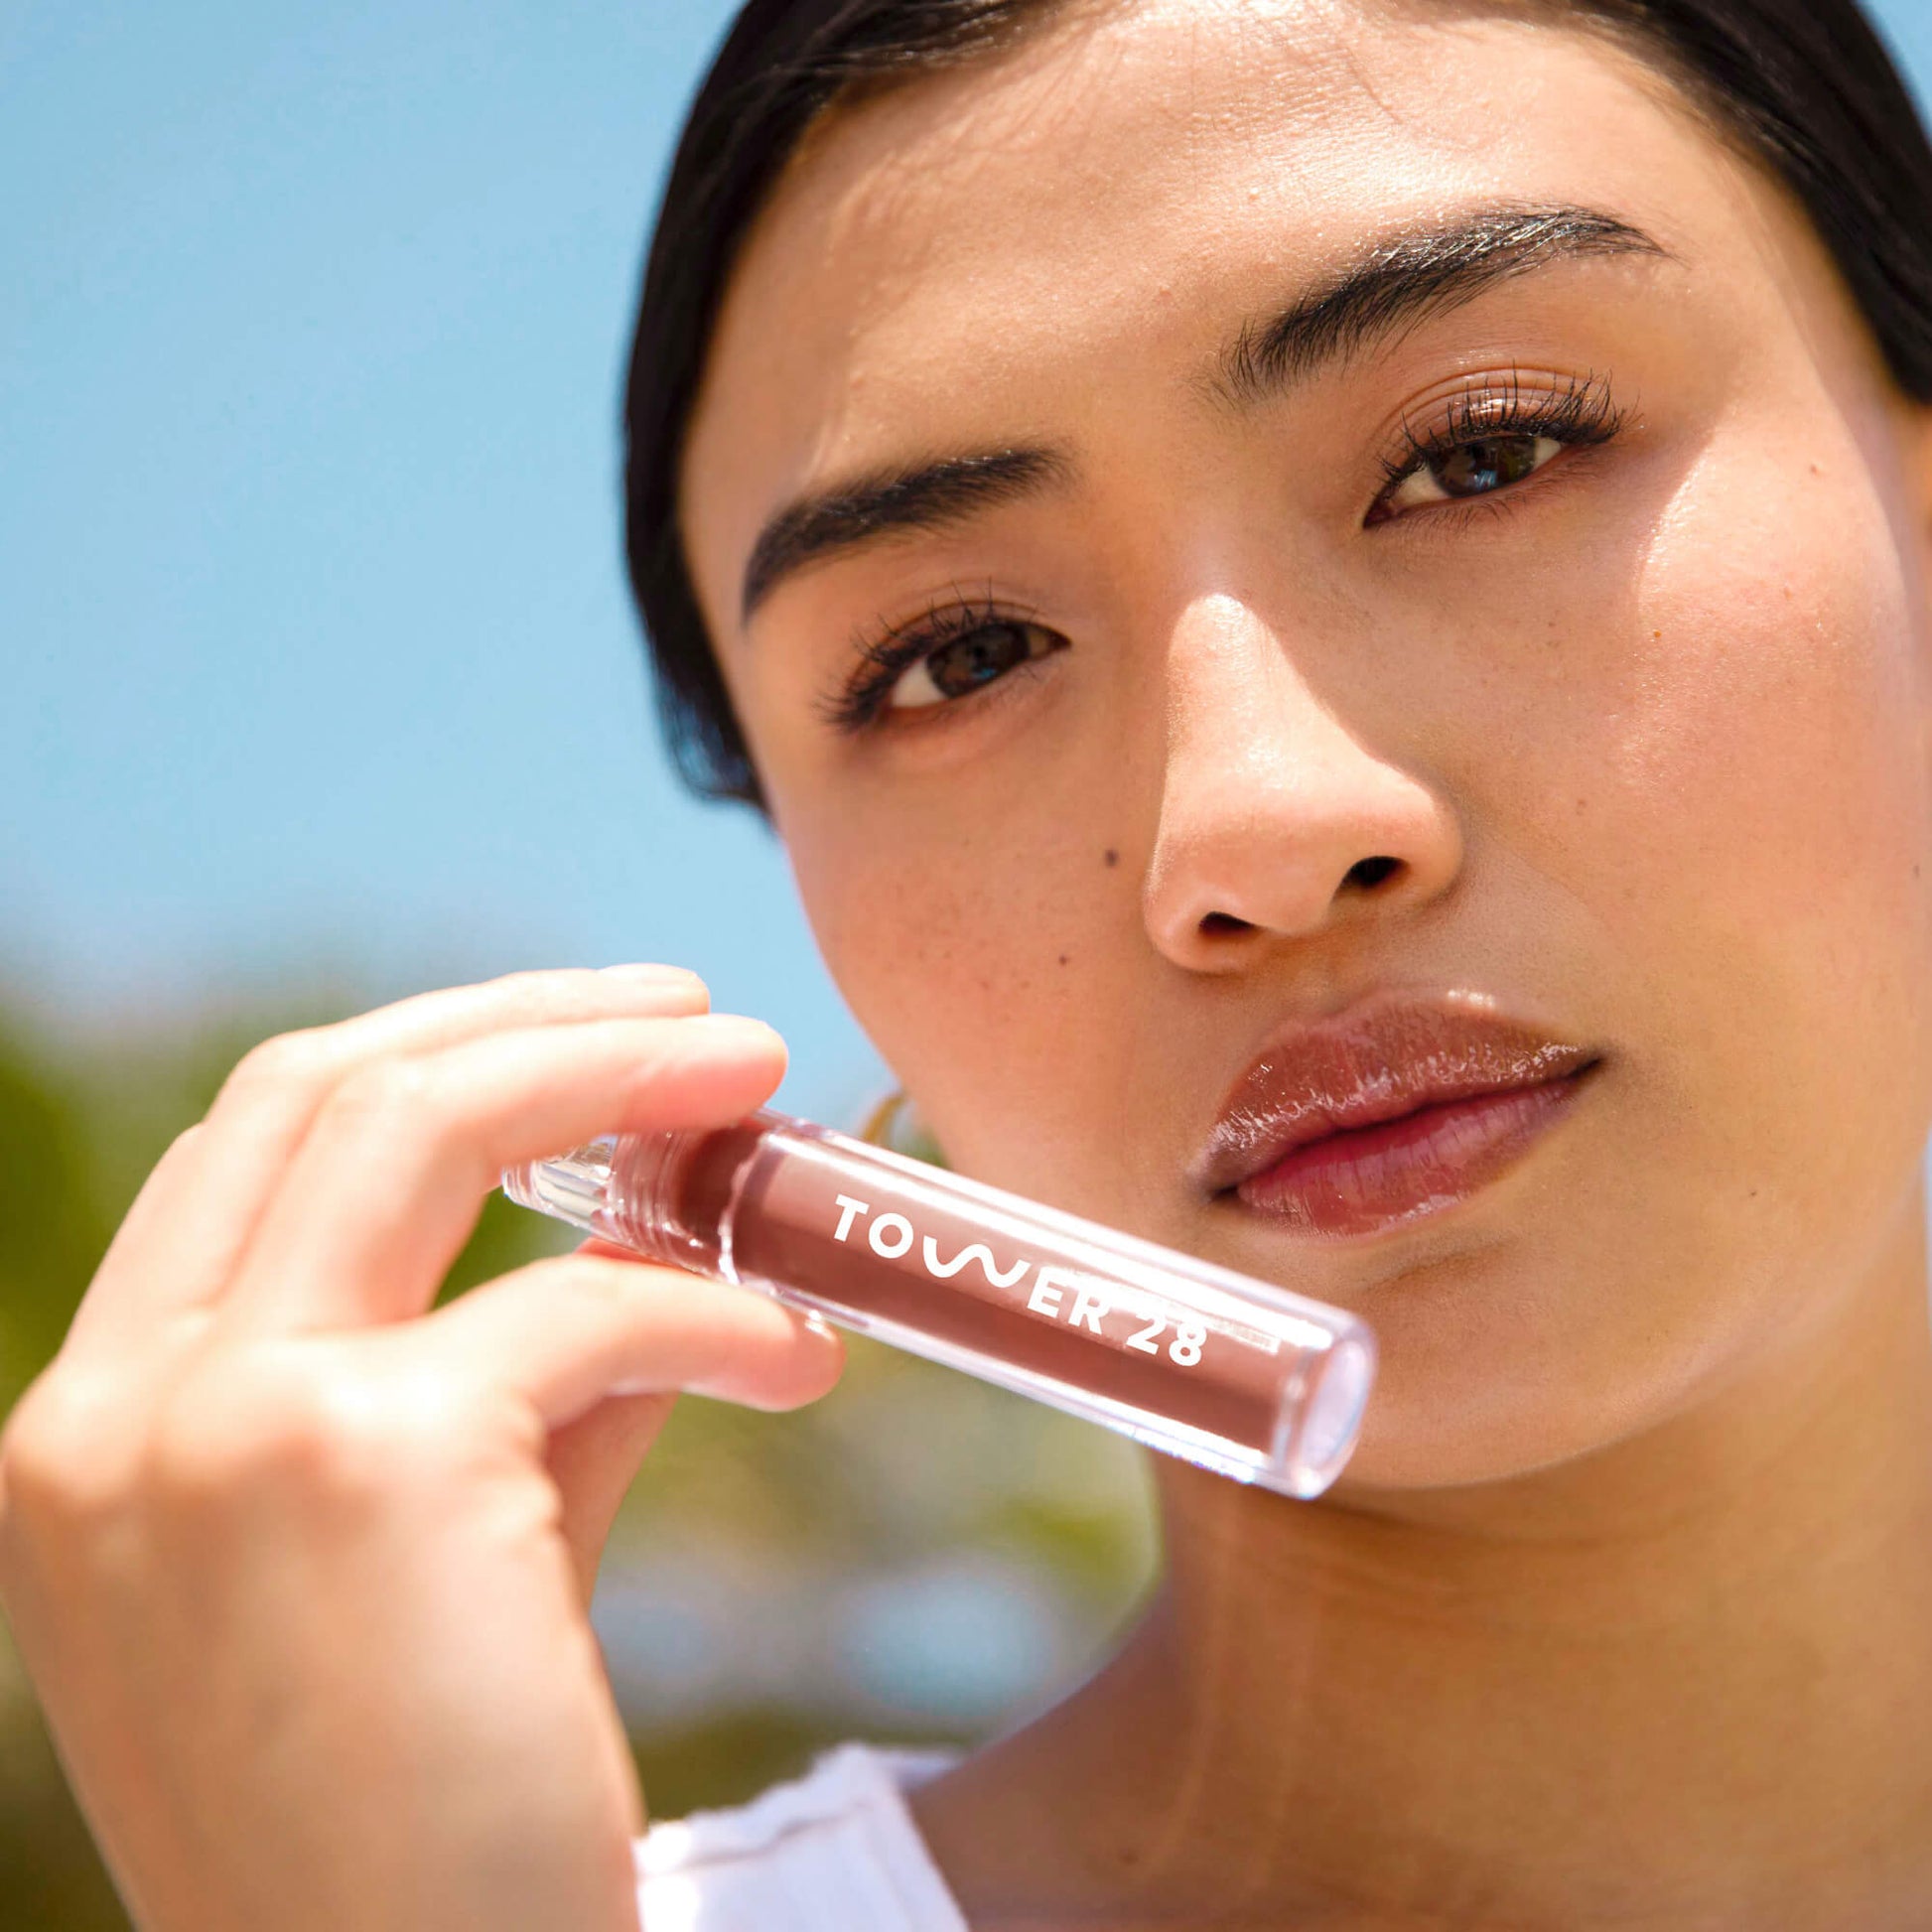 A model wearing the Tower 28 Beauty ShineOn Lip Jelly in the shade Almond on her lips